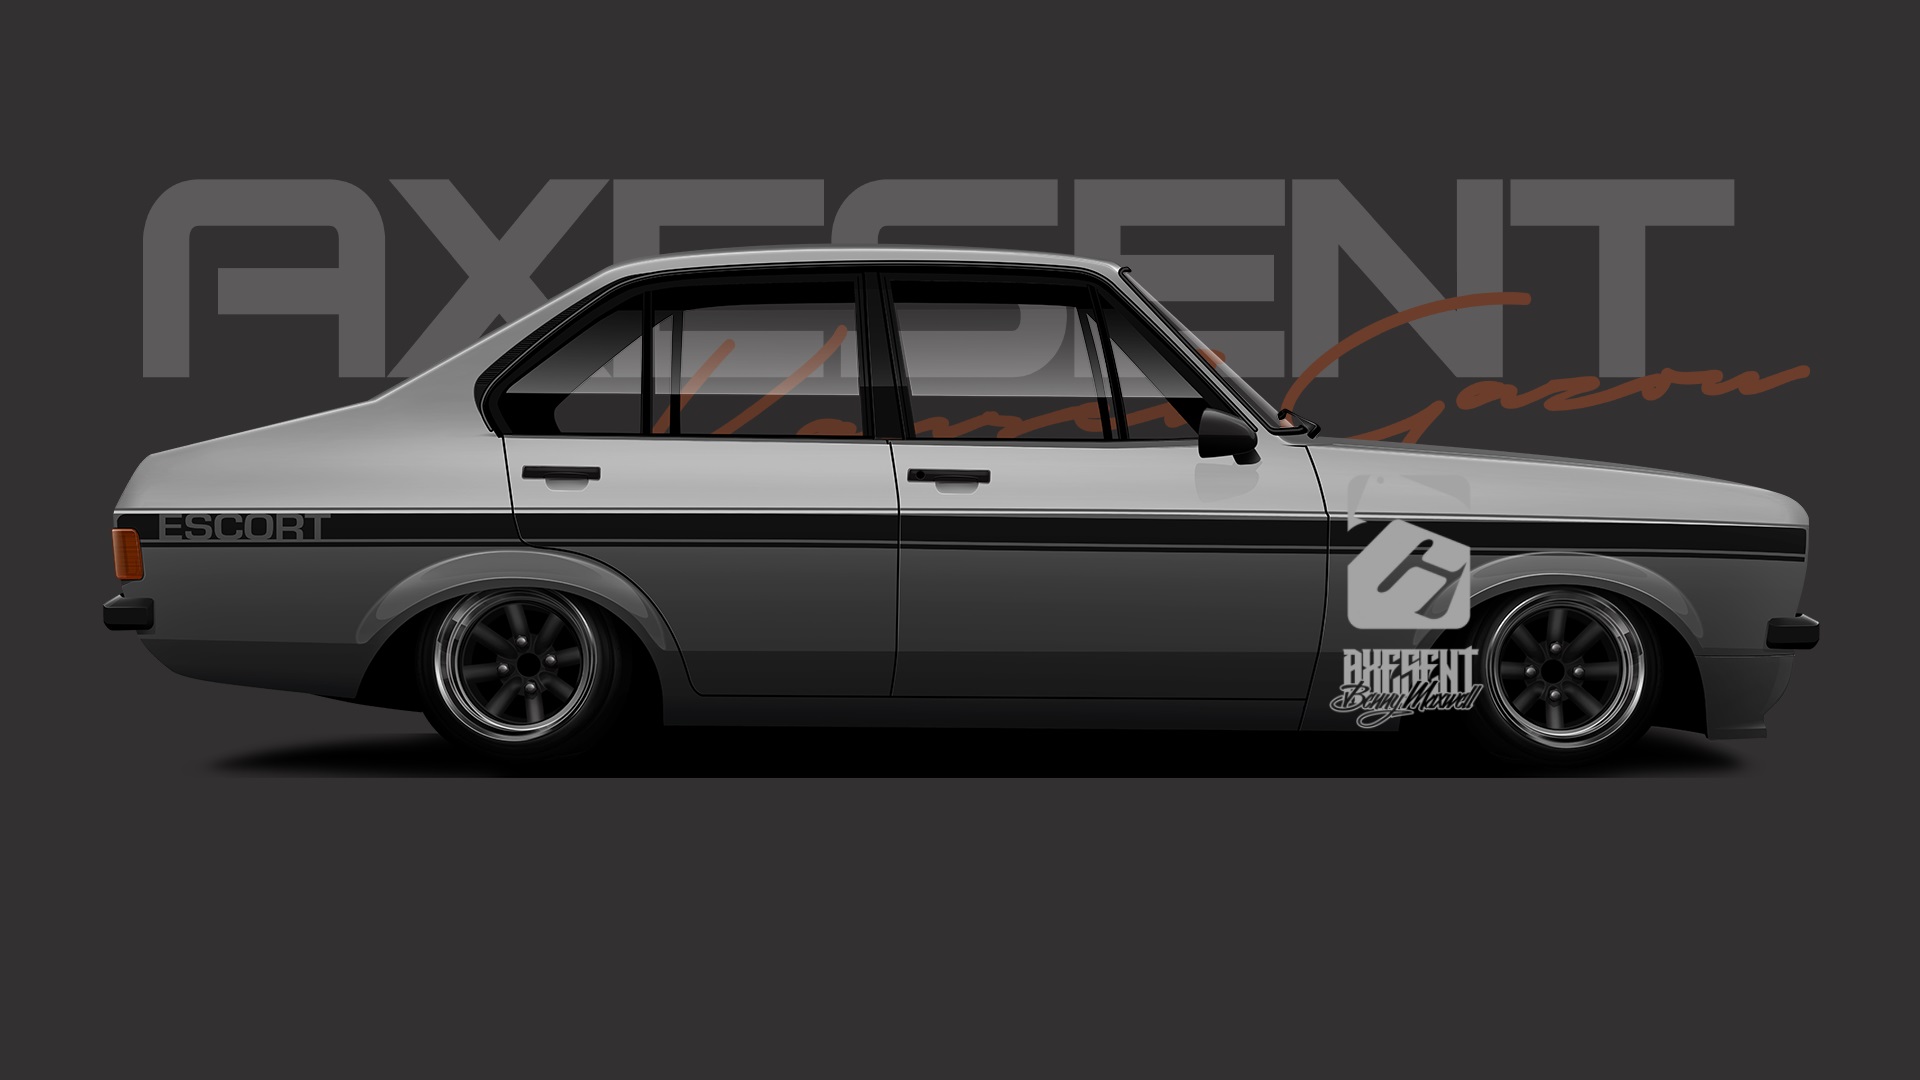 General 1920x1080 Axesent Creations CGI Ford Escort MkII Ford British cars side view silver cars